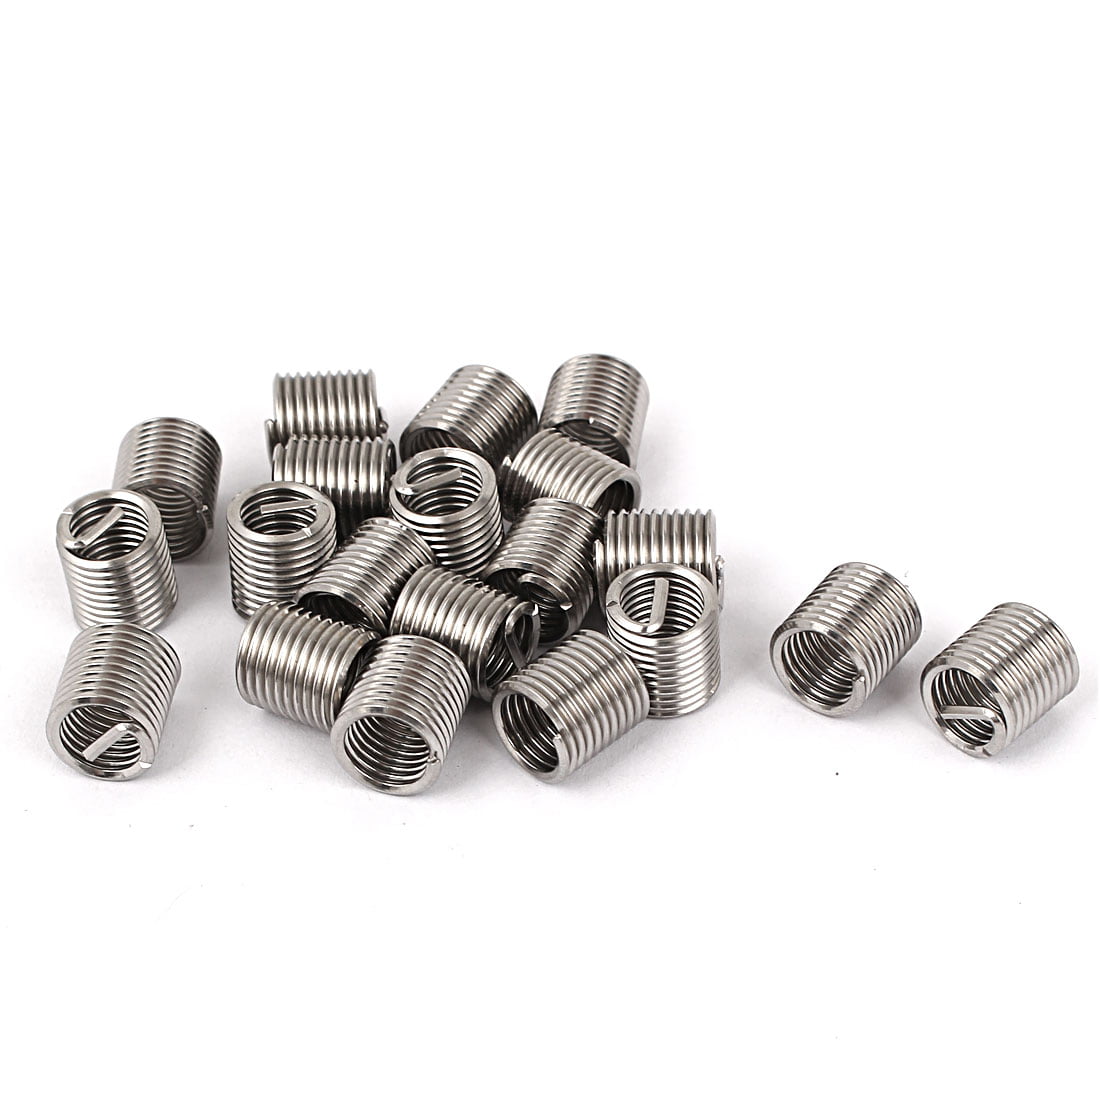 Details about   10pcs Fine Thread M10x1.25x2.5D Helicoil Wire Thread Inserts 304 Stainless Steel 